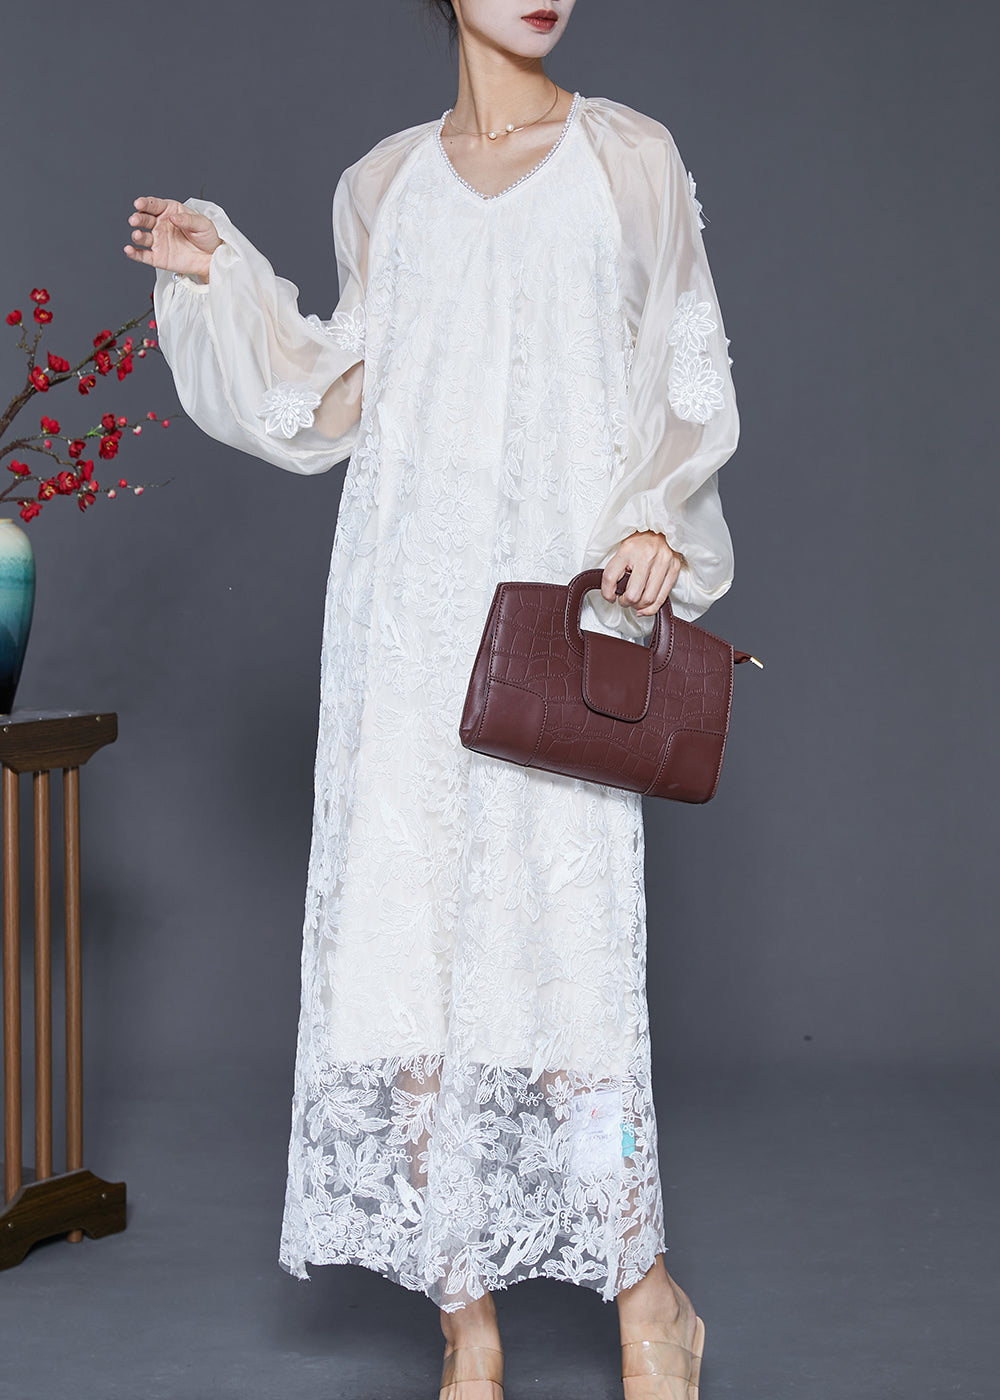 French White Stereoscopic Floral Lace Long Dresses Fall